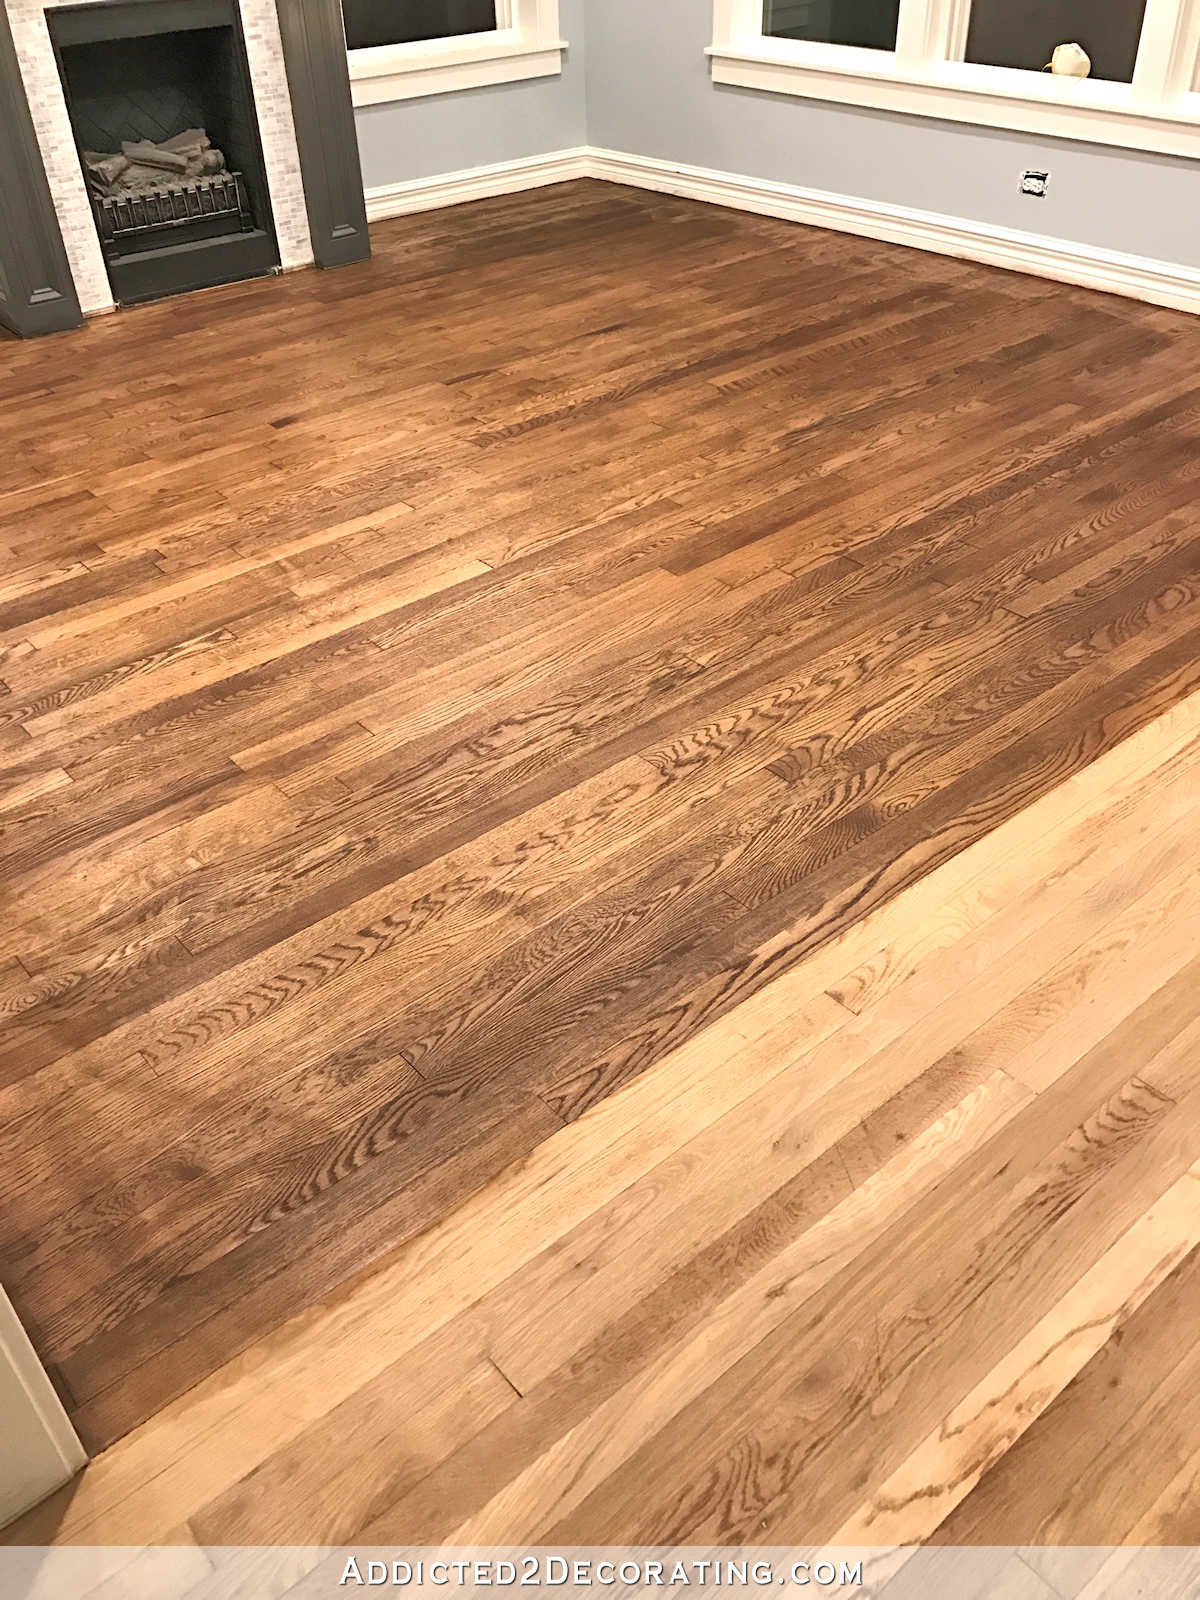 27 attractive How Difficult is It to Refinish Hardwood Floors 2023 free download how difficult is it to refinish hardwood floors of adventures in staining my red oak hardwood floors products process inside staining red oak hardwood floors 7 stain on the living room floor